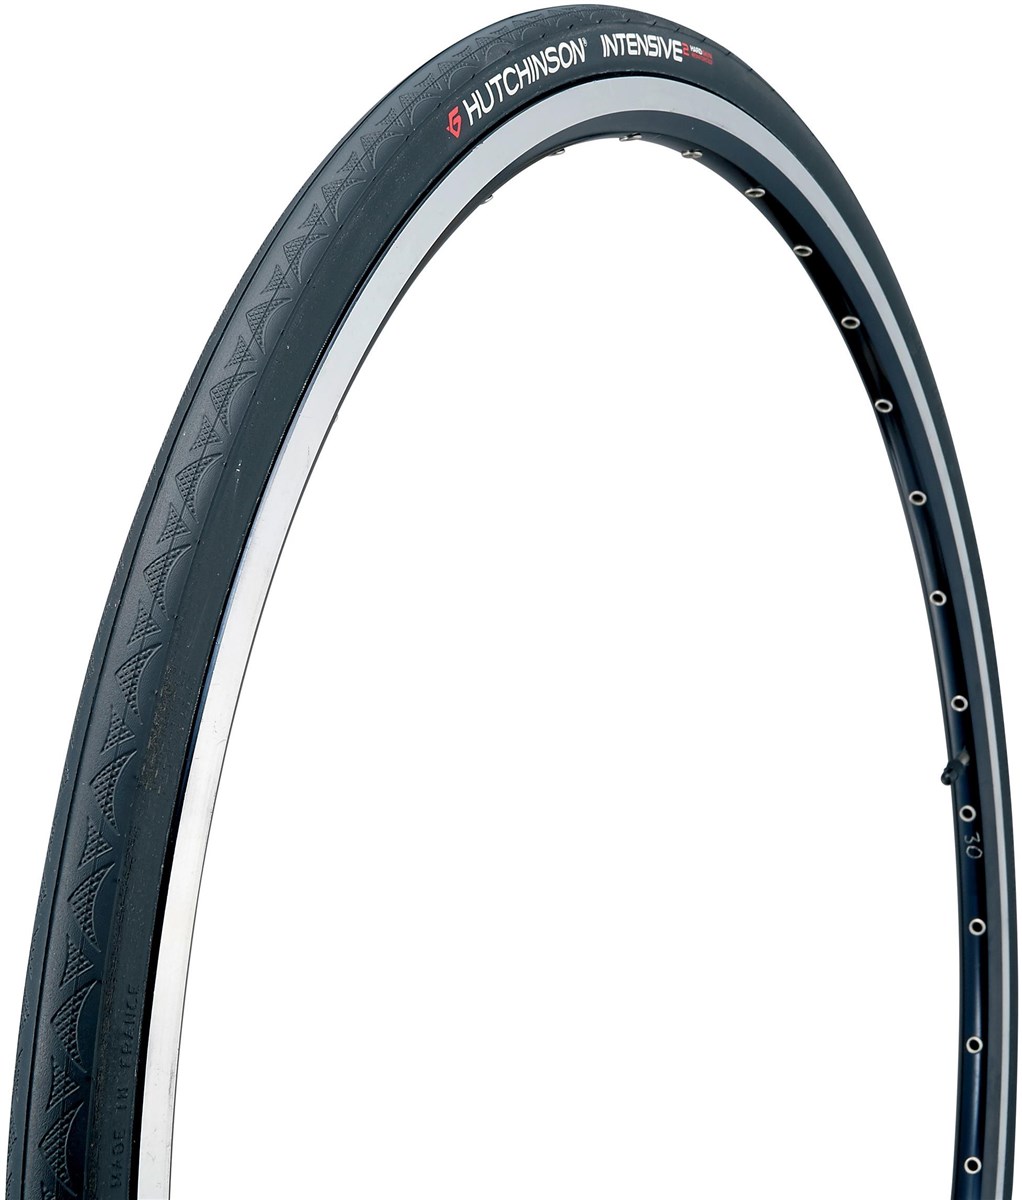 Hutchinson Intensive 2 Road Tyre product image